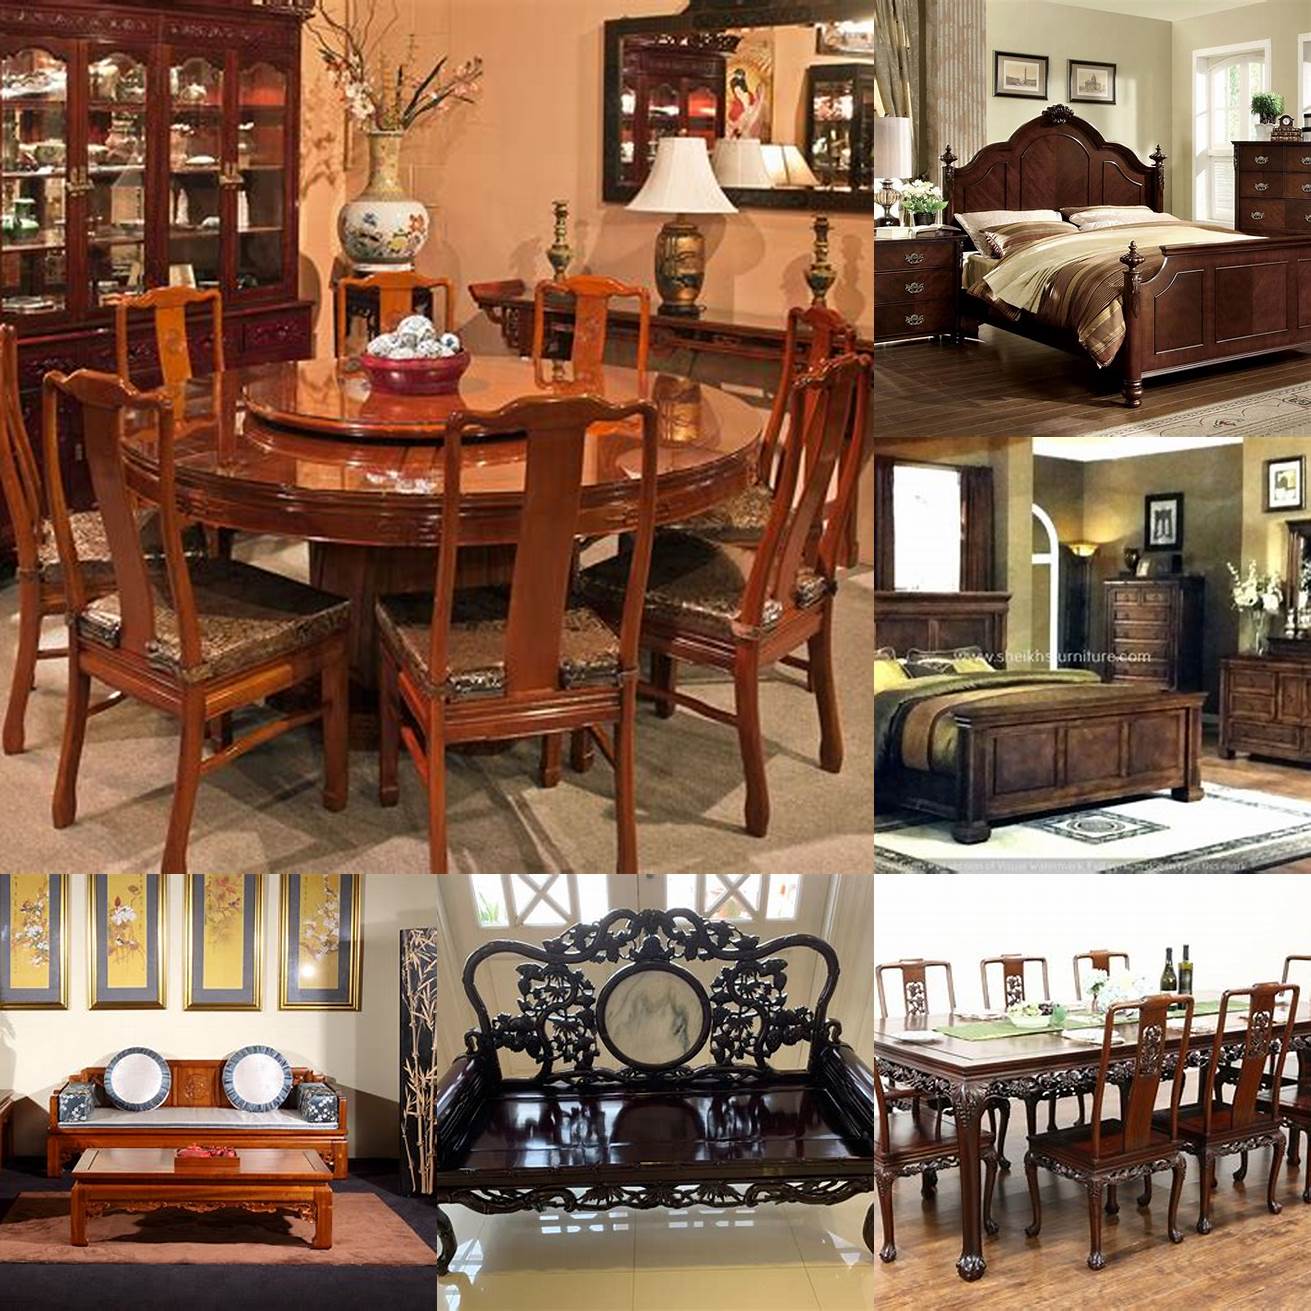 Rosewood furniture in a home